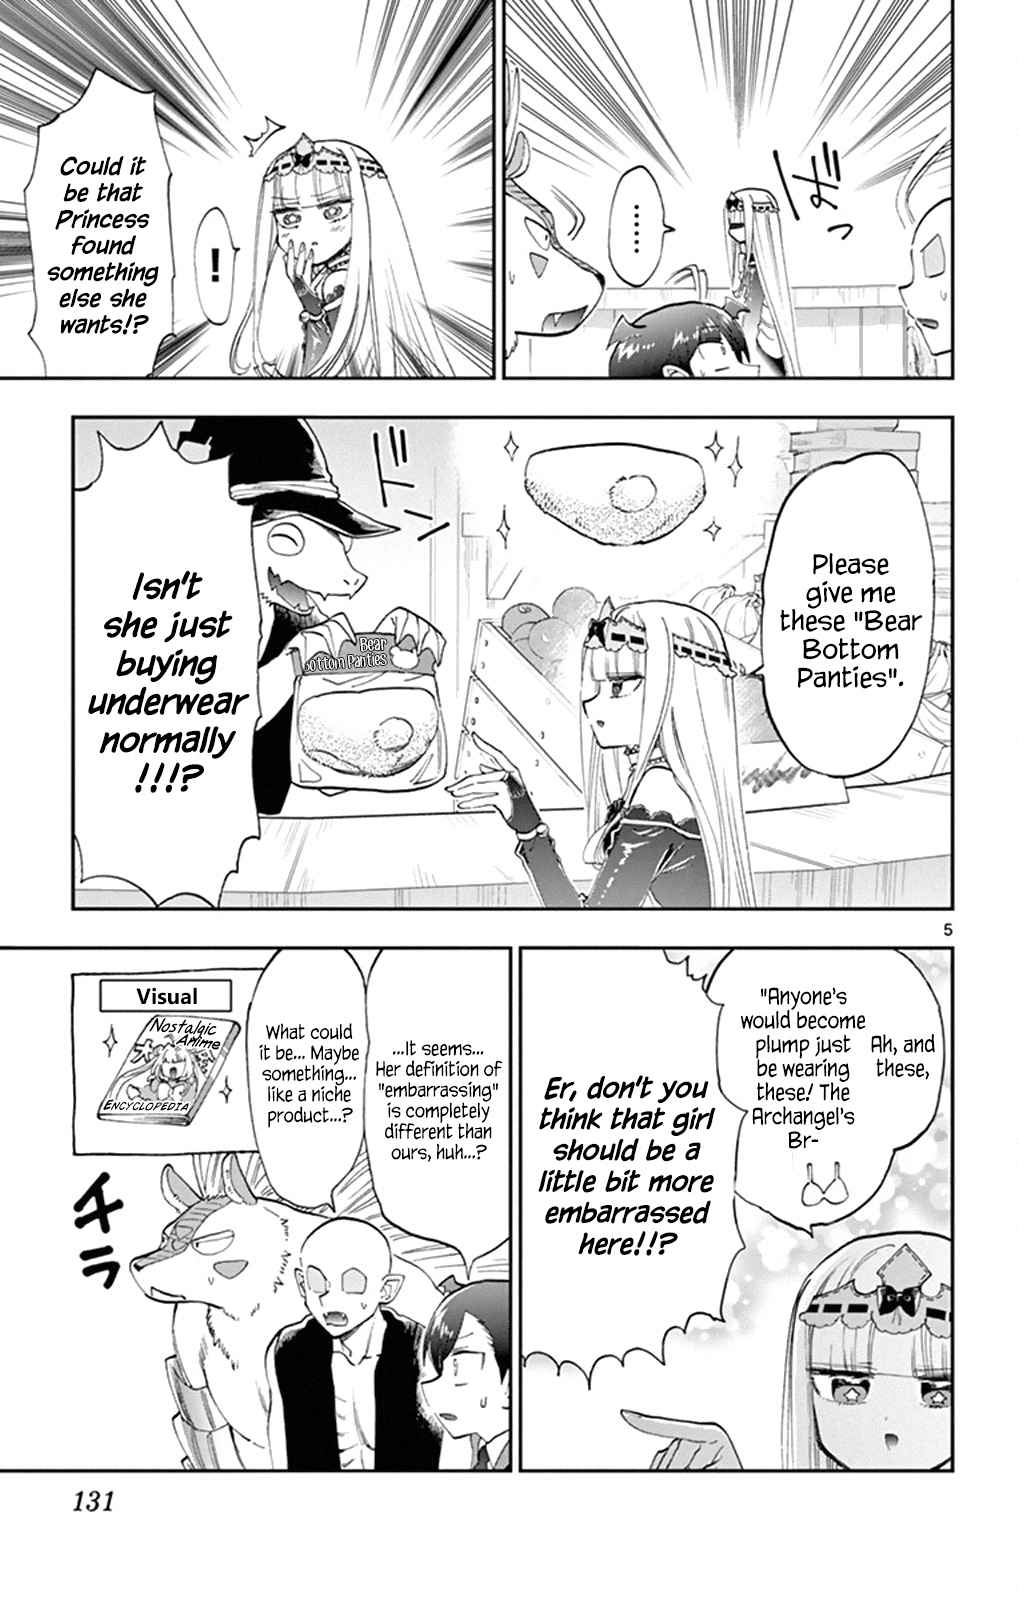 Maou jou de Oyasumi Vol. 12 Ch. 154 Pointing Fingers is Impolite After All...